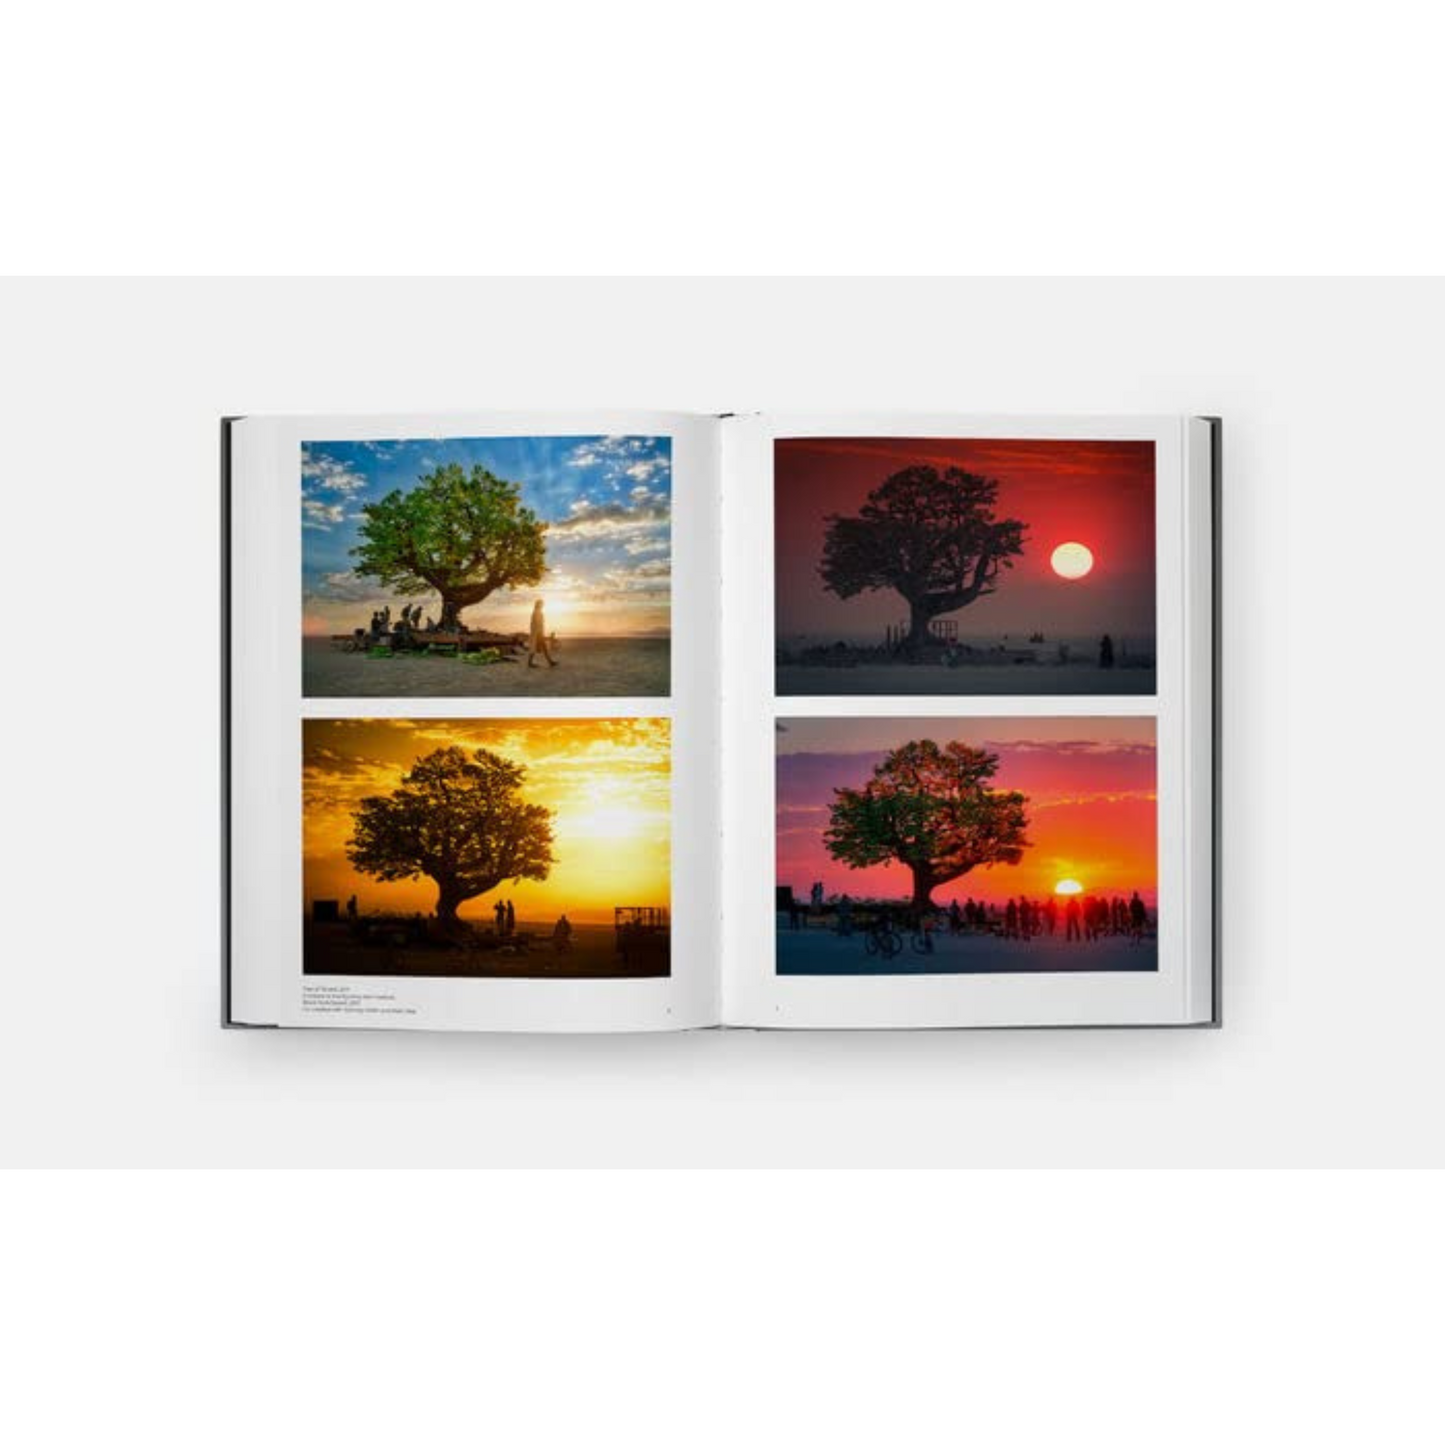 Internal double page spread of four similar photos of tree with sunset behind it.